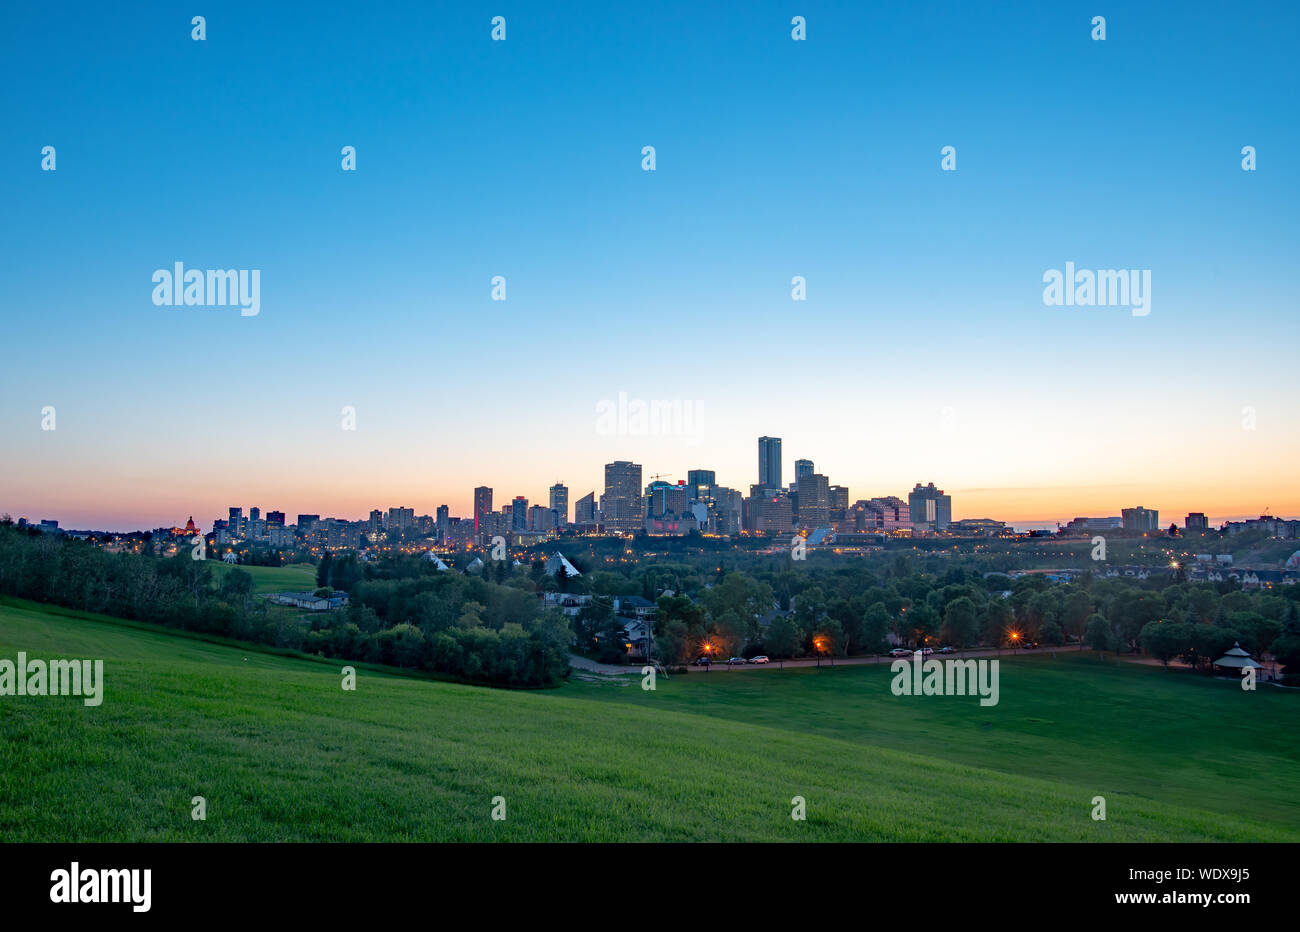 The city of Edmonton downtown skyline during dusk on a summer evening Stock Photo